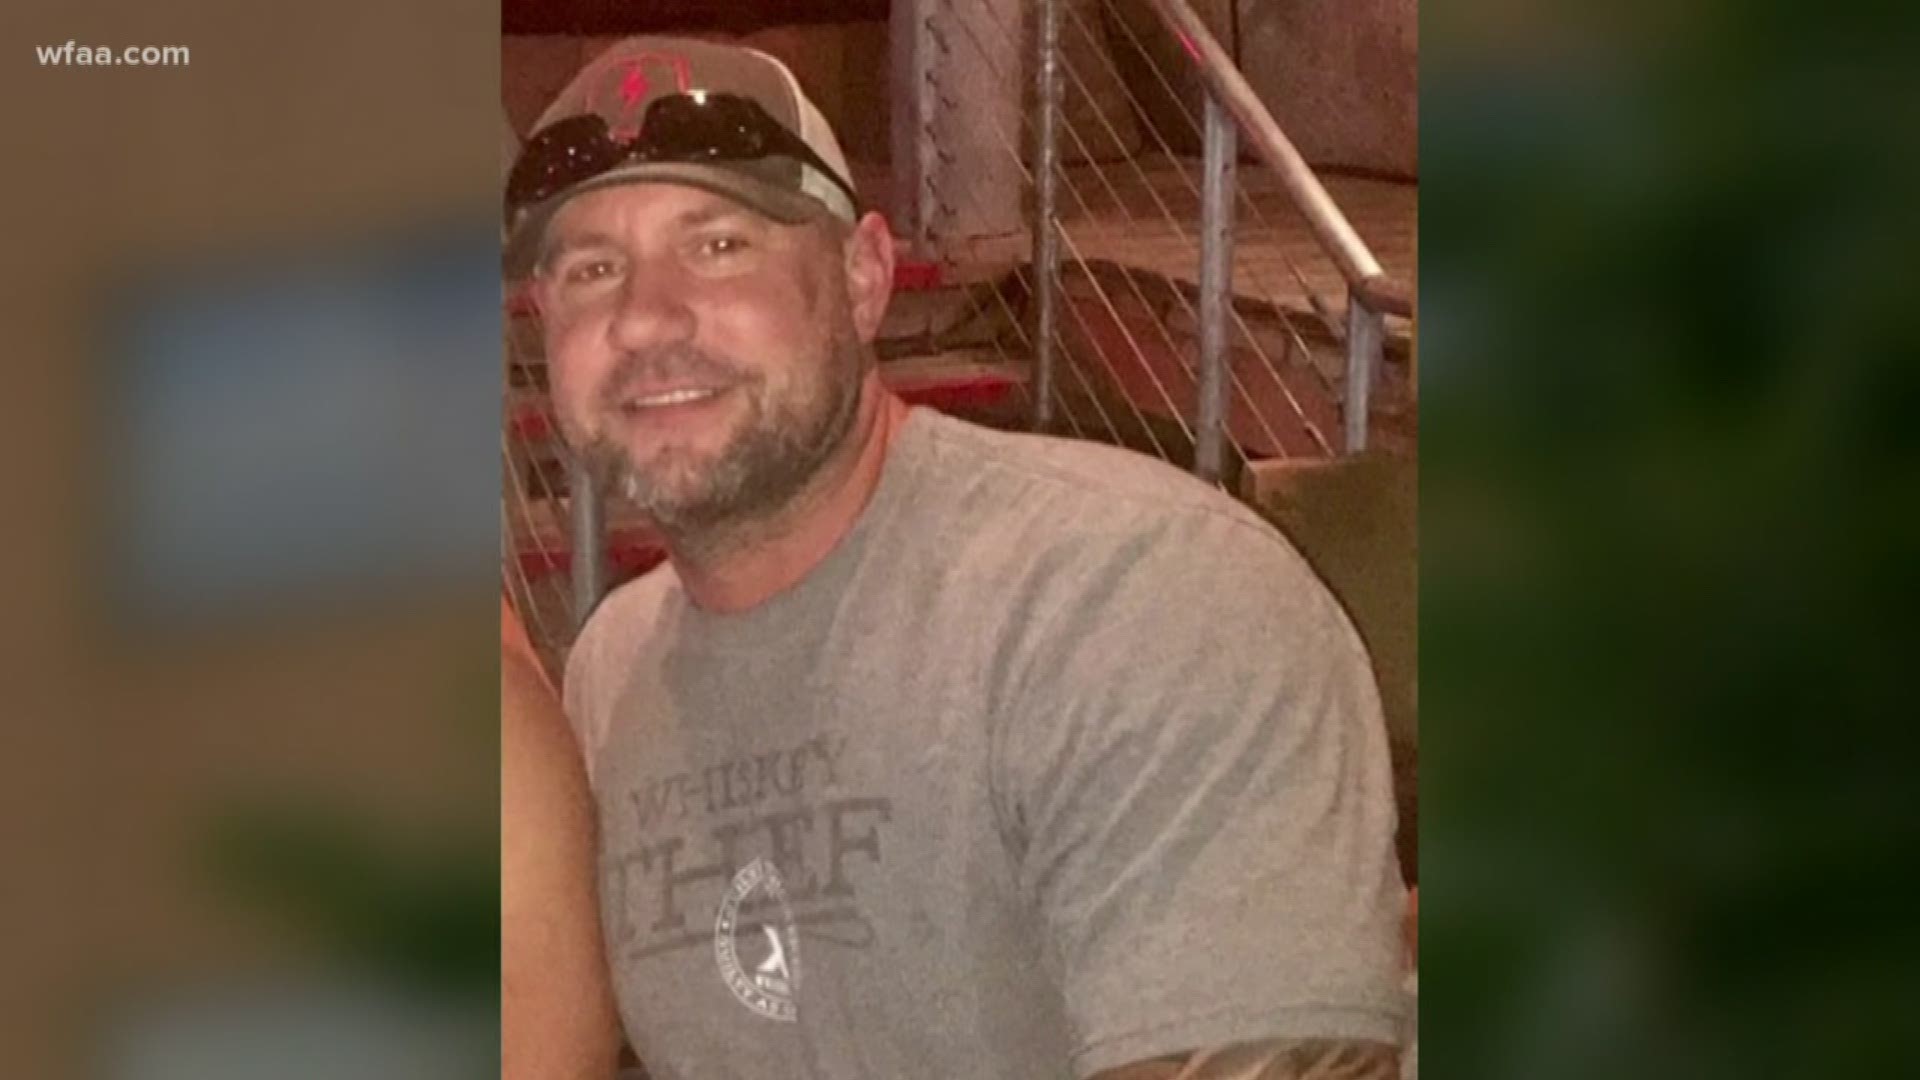 Officer Garrett Hull, who was shot in the head while confronting the suspects, died about 9:40 p.m. Friday at John Peter Smith Hospital in Fort Worth.